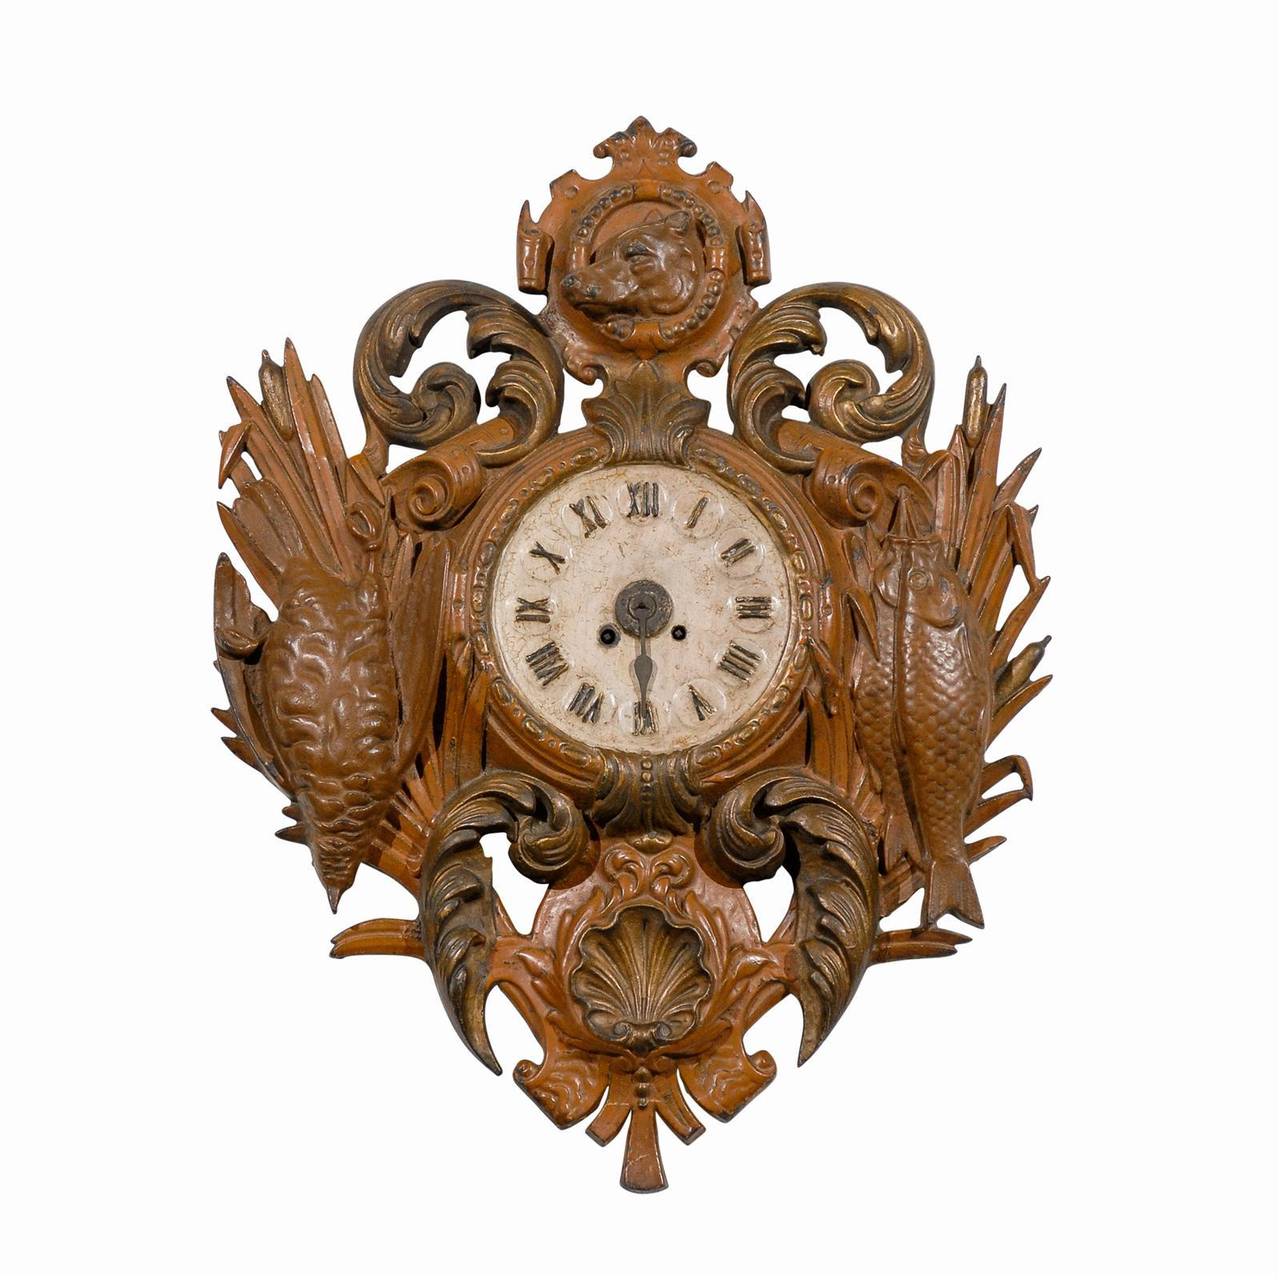 19th century painted French iron Cartel clock in the Black Forest style with fishing and hunting depictions. A quartz movement has been added.